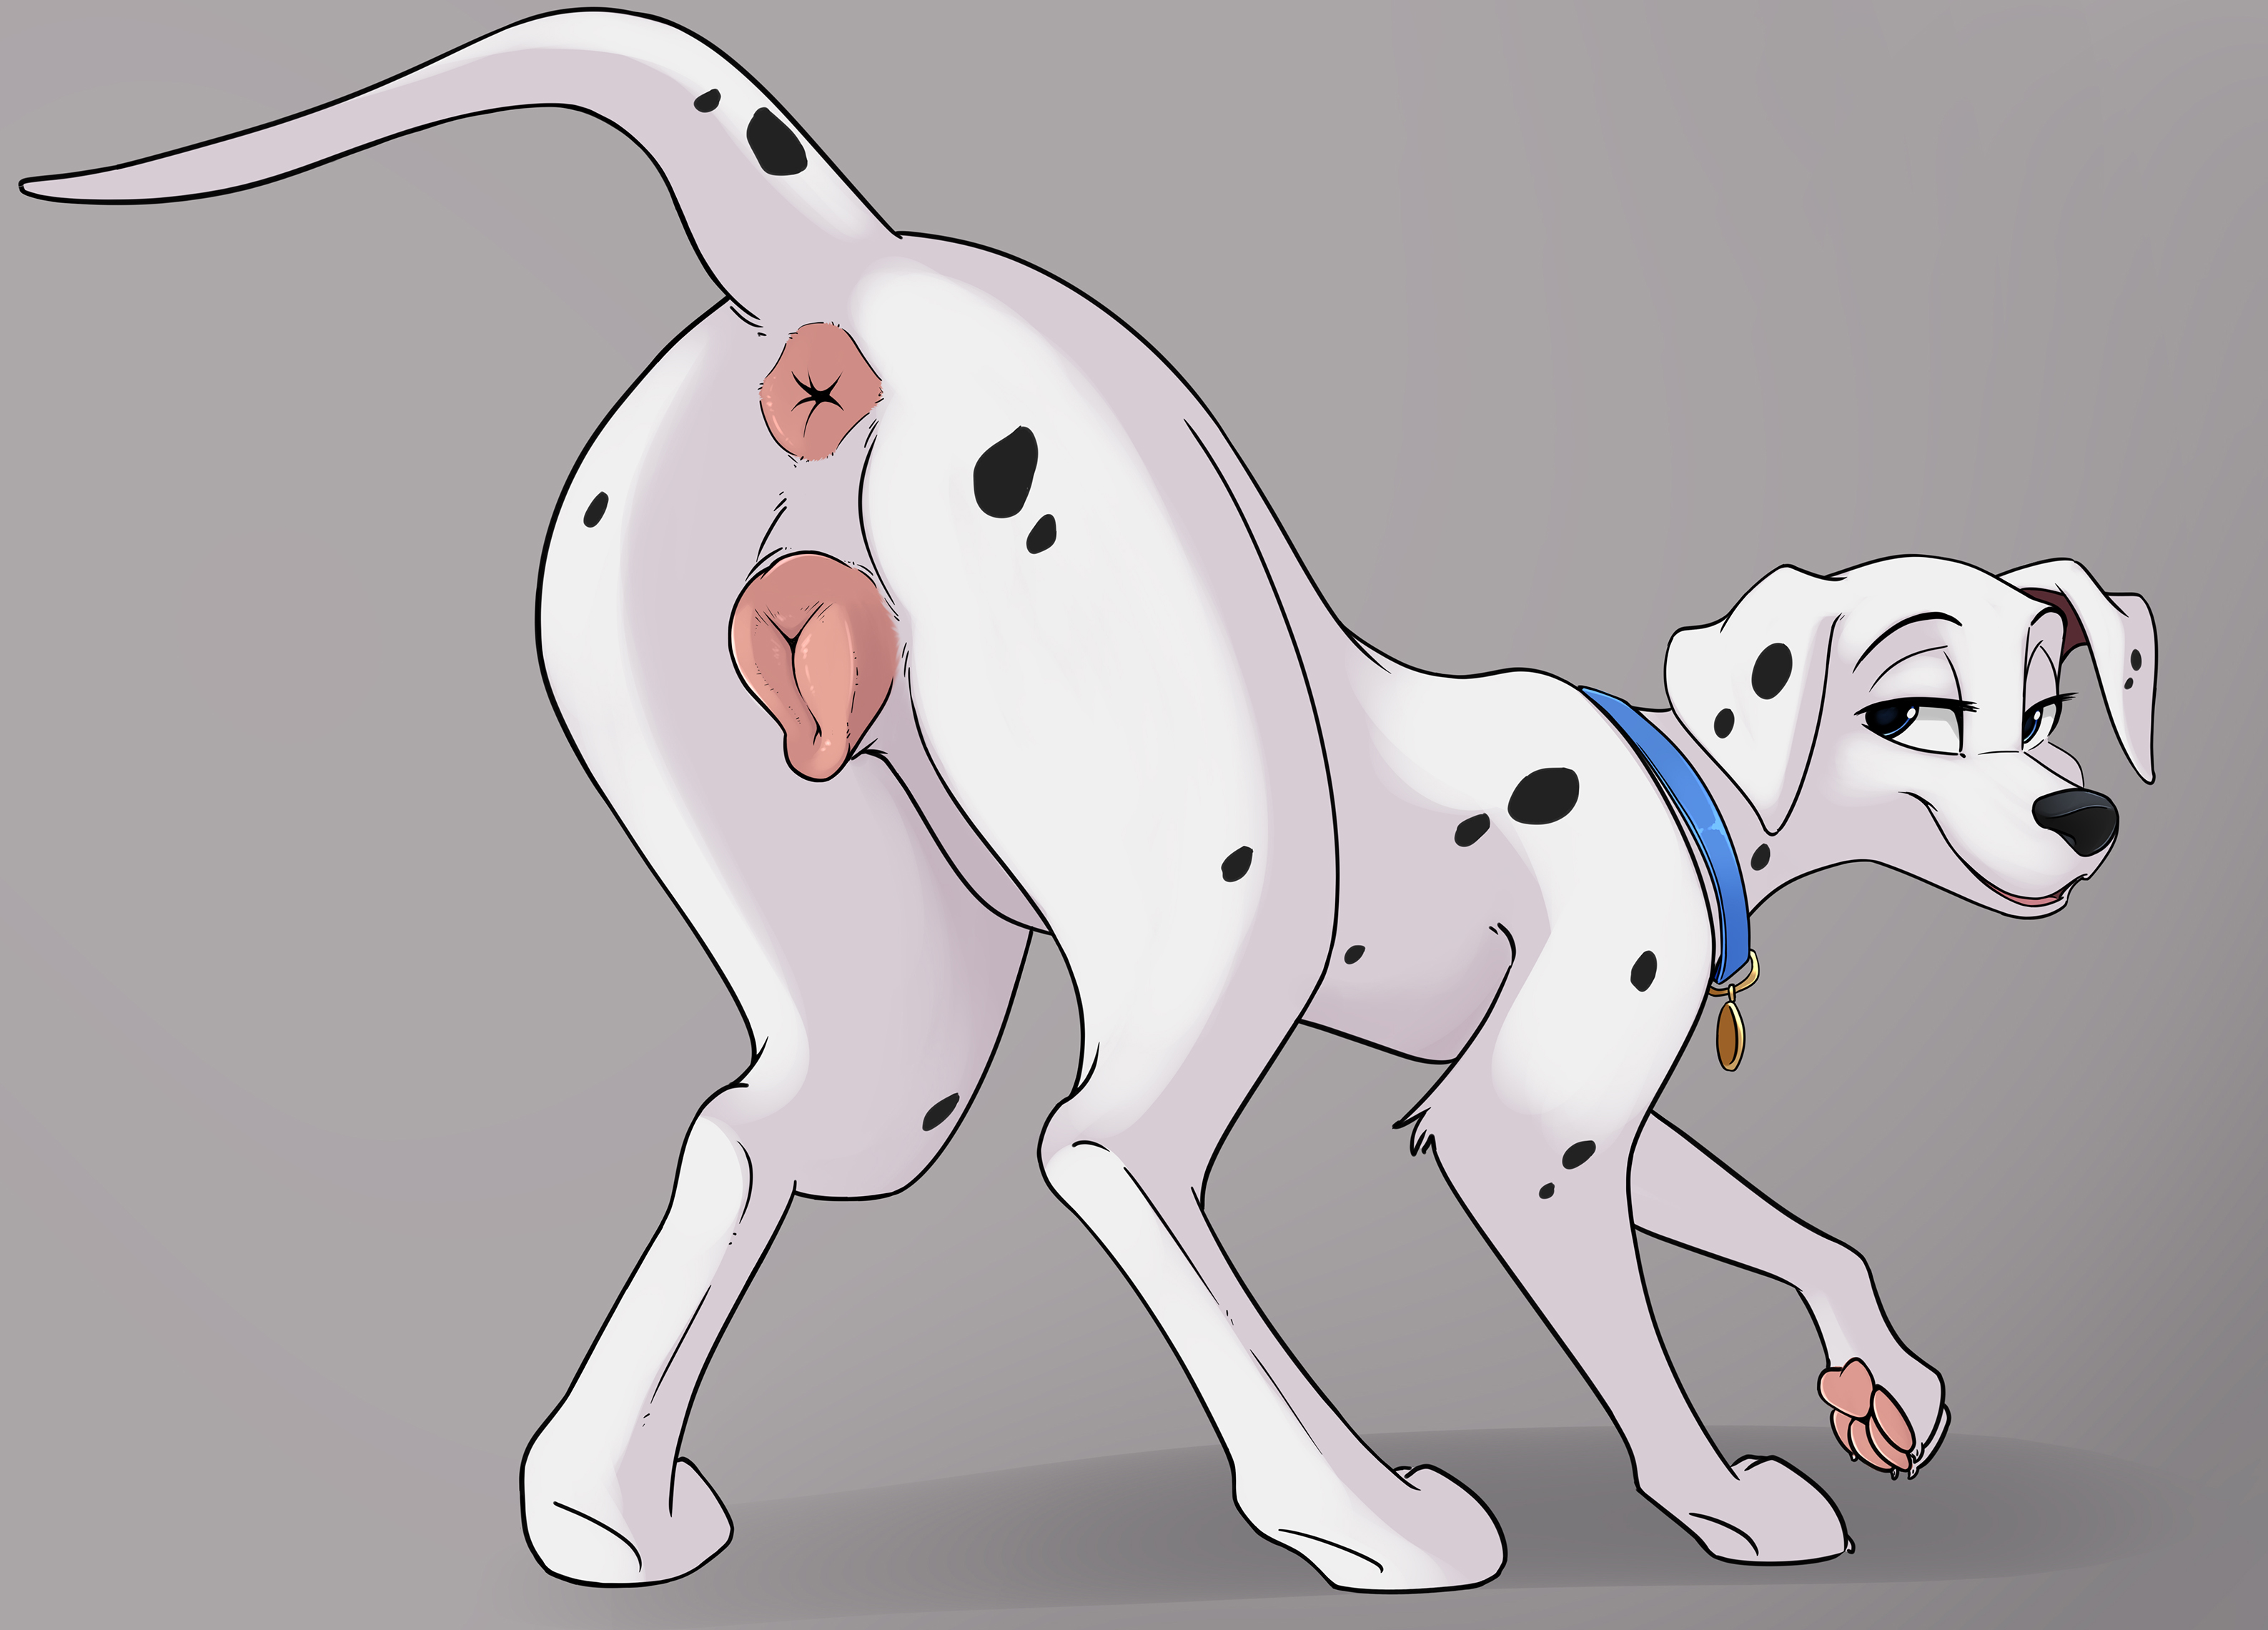 101 Dalmatians: A Sizzling Collection of Erotic Comics You Can't Miss